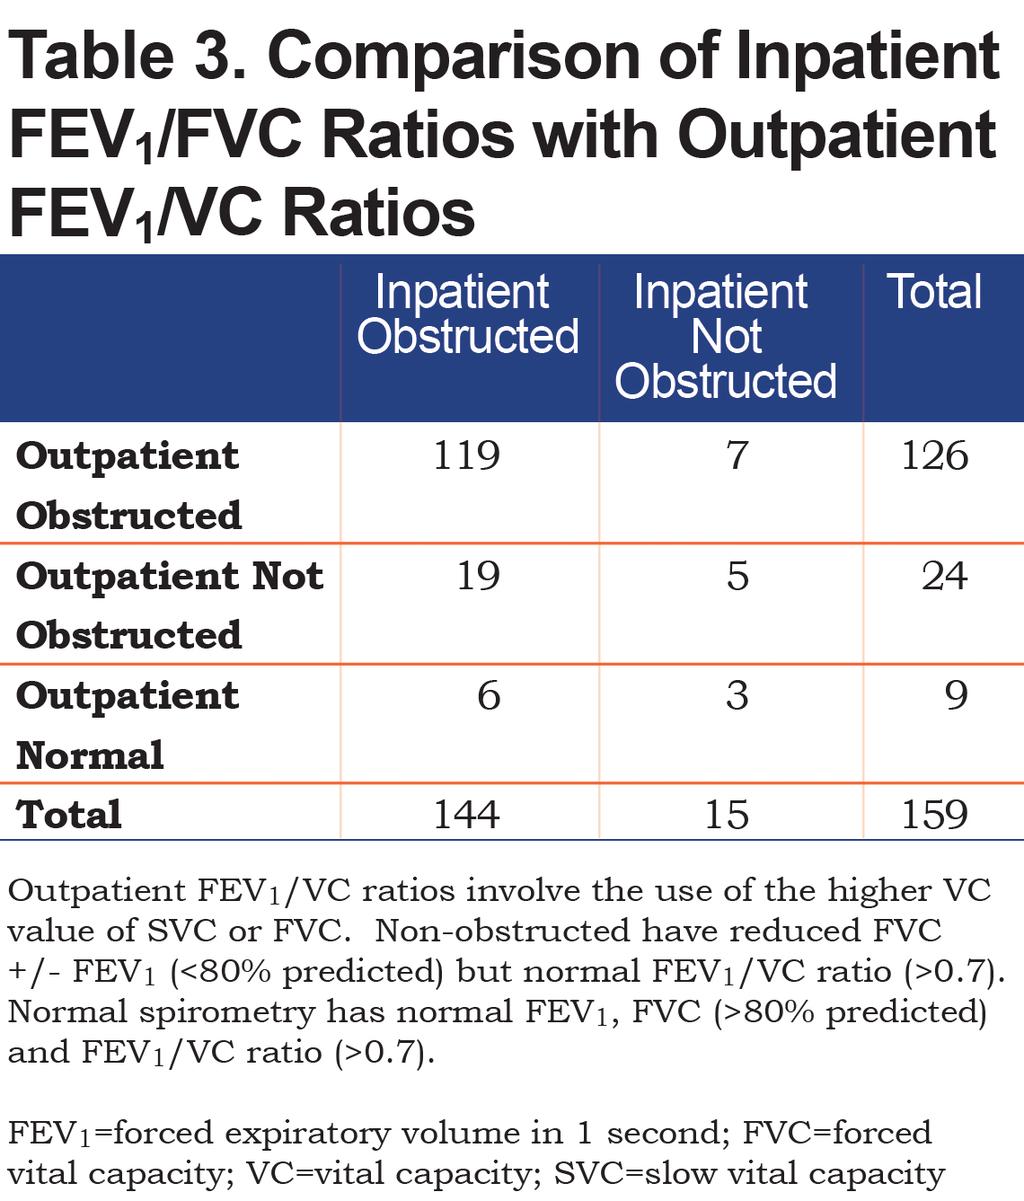 3%) did not have FEV1<50% on outpatient testing.